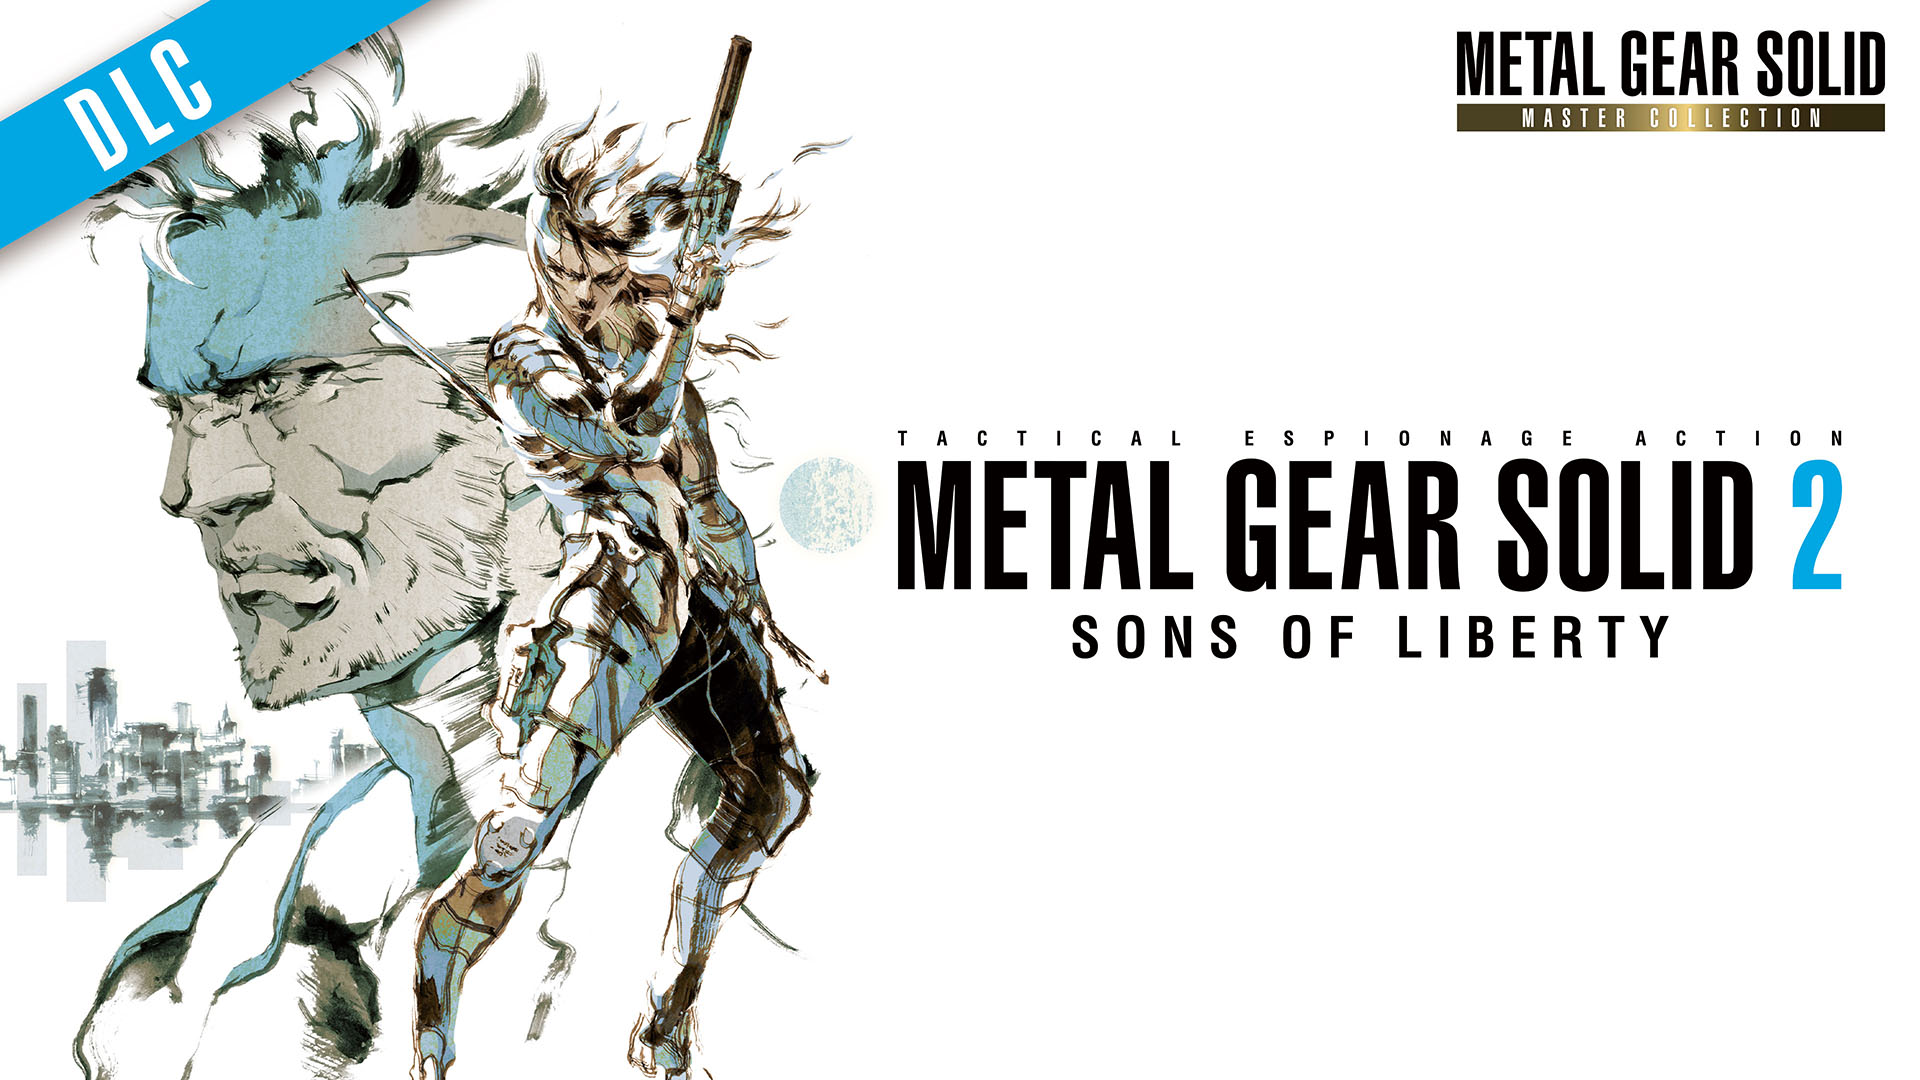 METAL GEAR SOLID 2: Sons of Liberty - Master Collection Version Japanese Language Pack